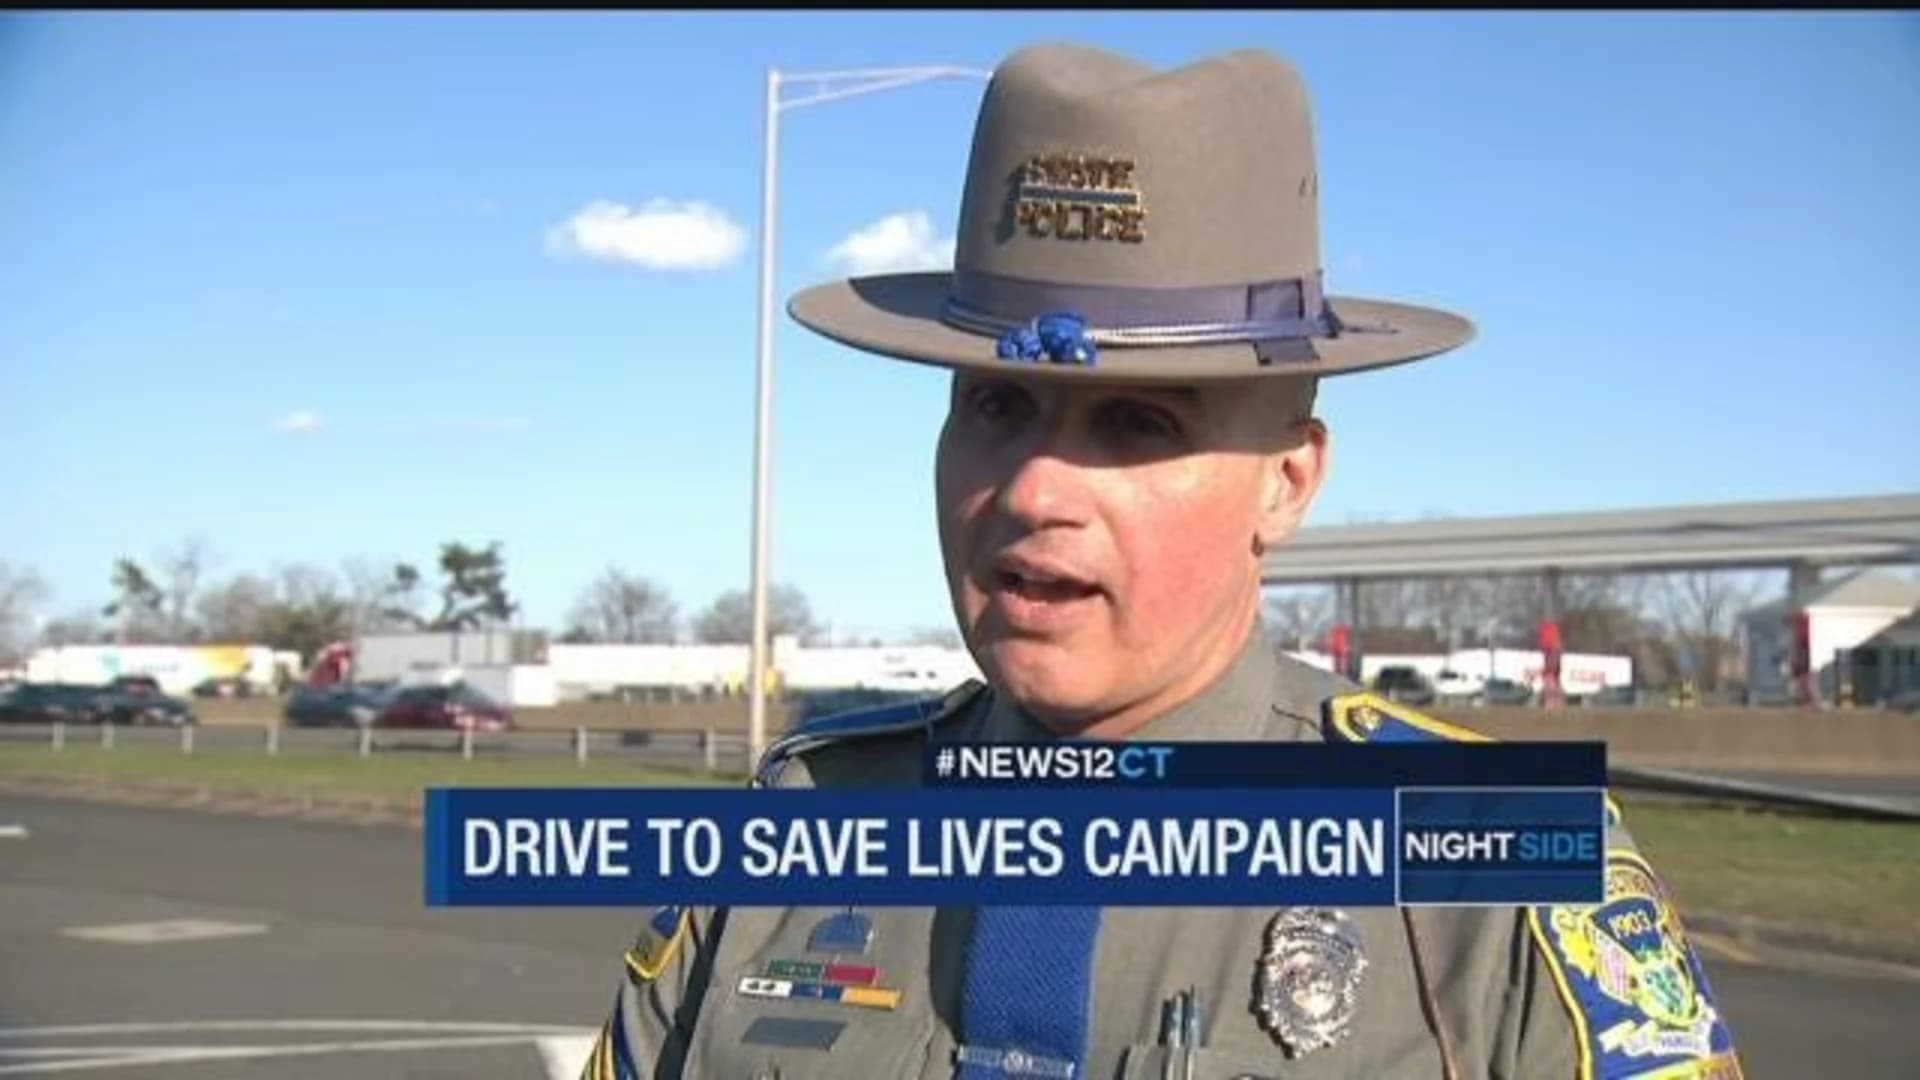 Police step up patrols during Drive to Save Lives campaign on I-95